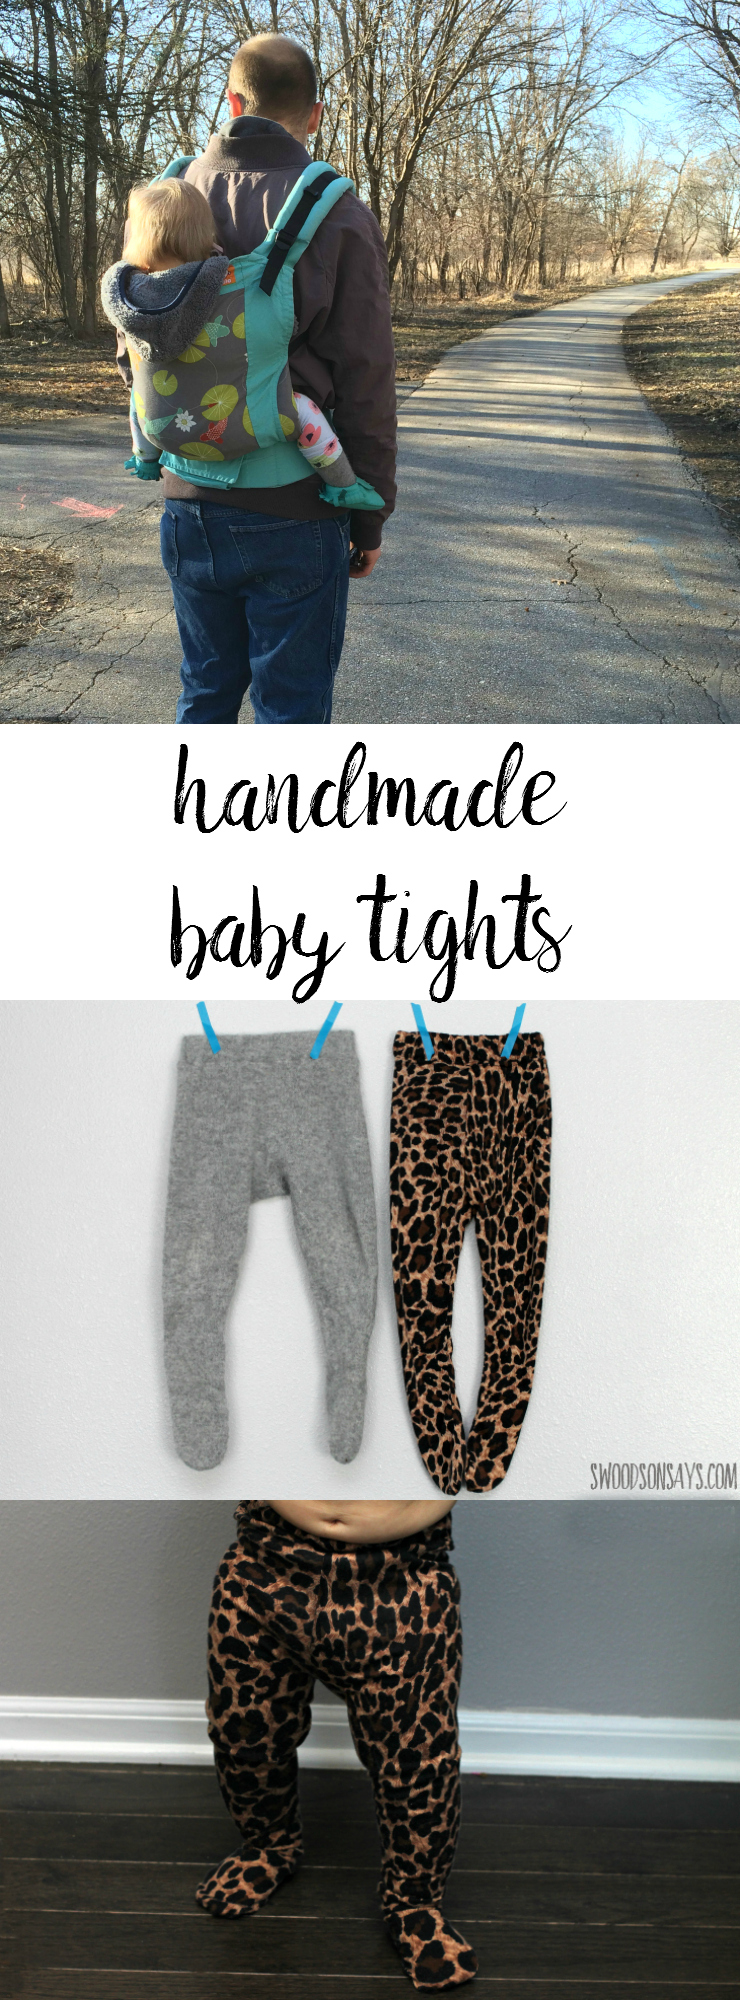 Handmade tights - the perfect thing to sew for a baby! This easy PDF pattern is quick to sew and easy to wear. I made a wool pair that were perfect for babywearing this past winter - and a leopard pair just for fun!